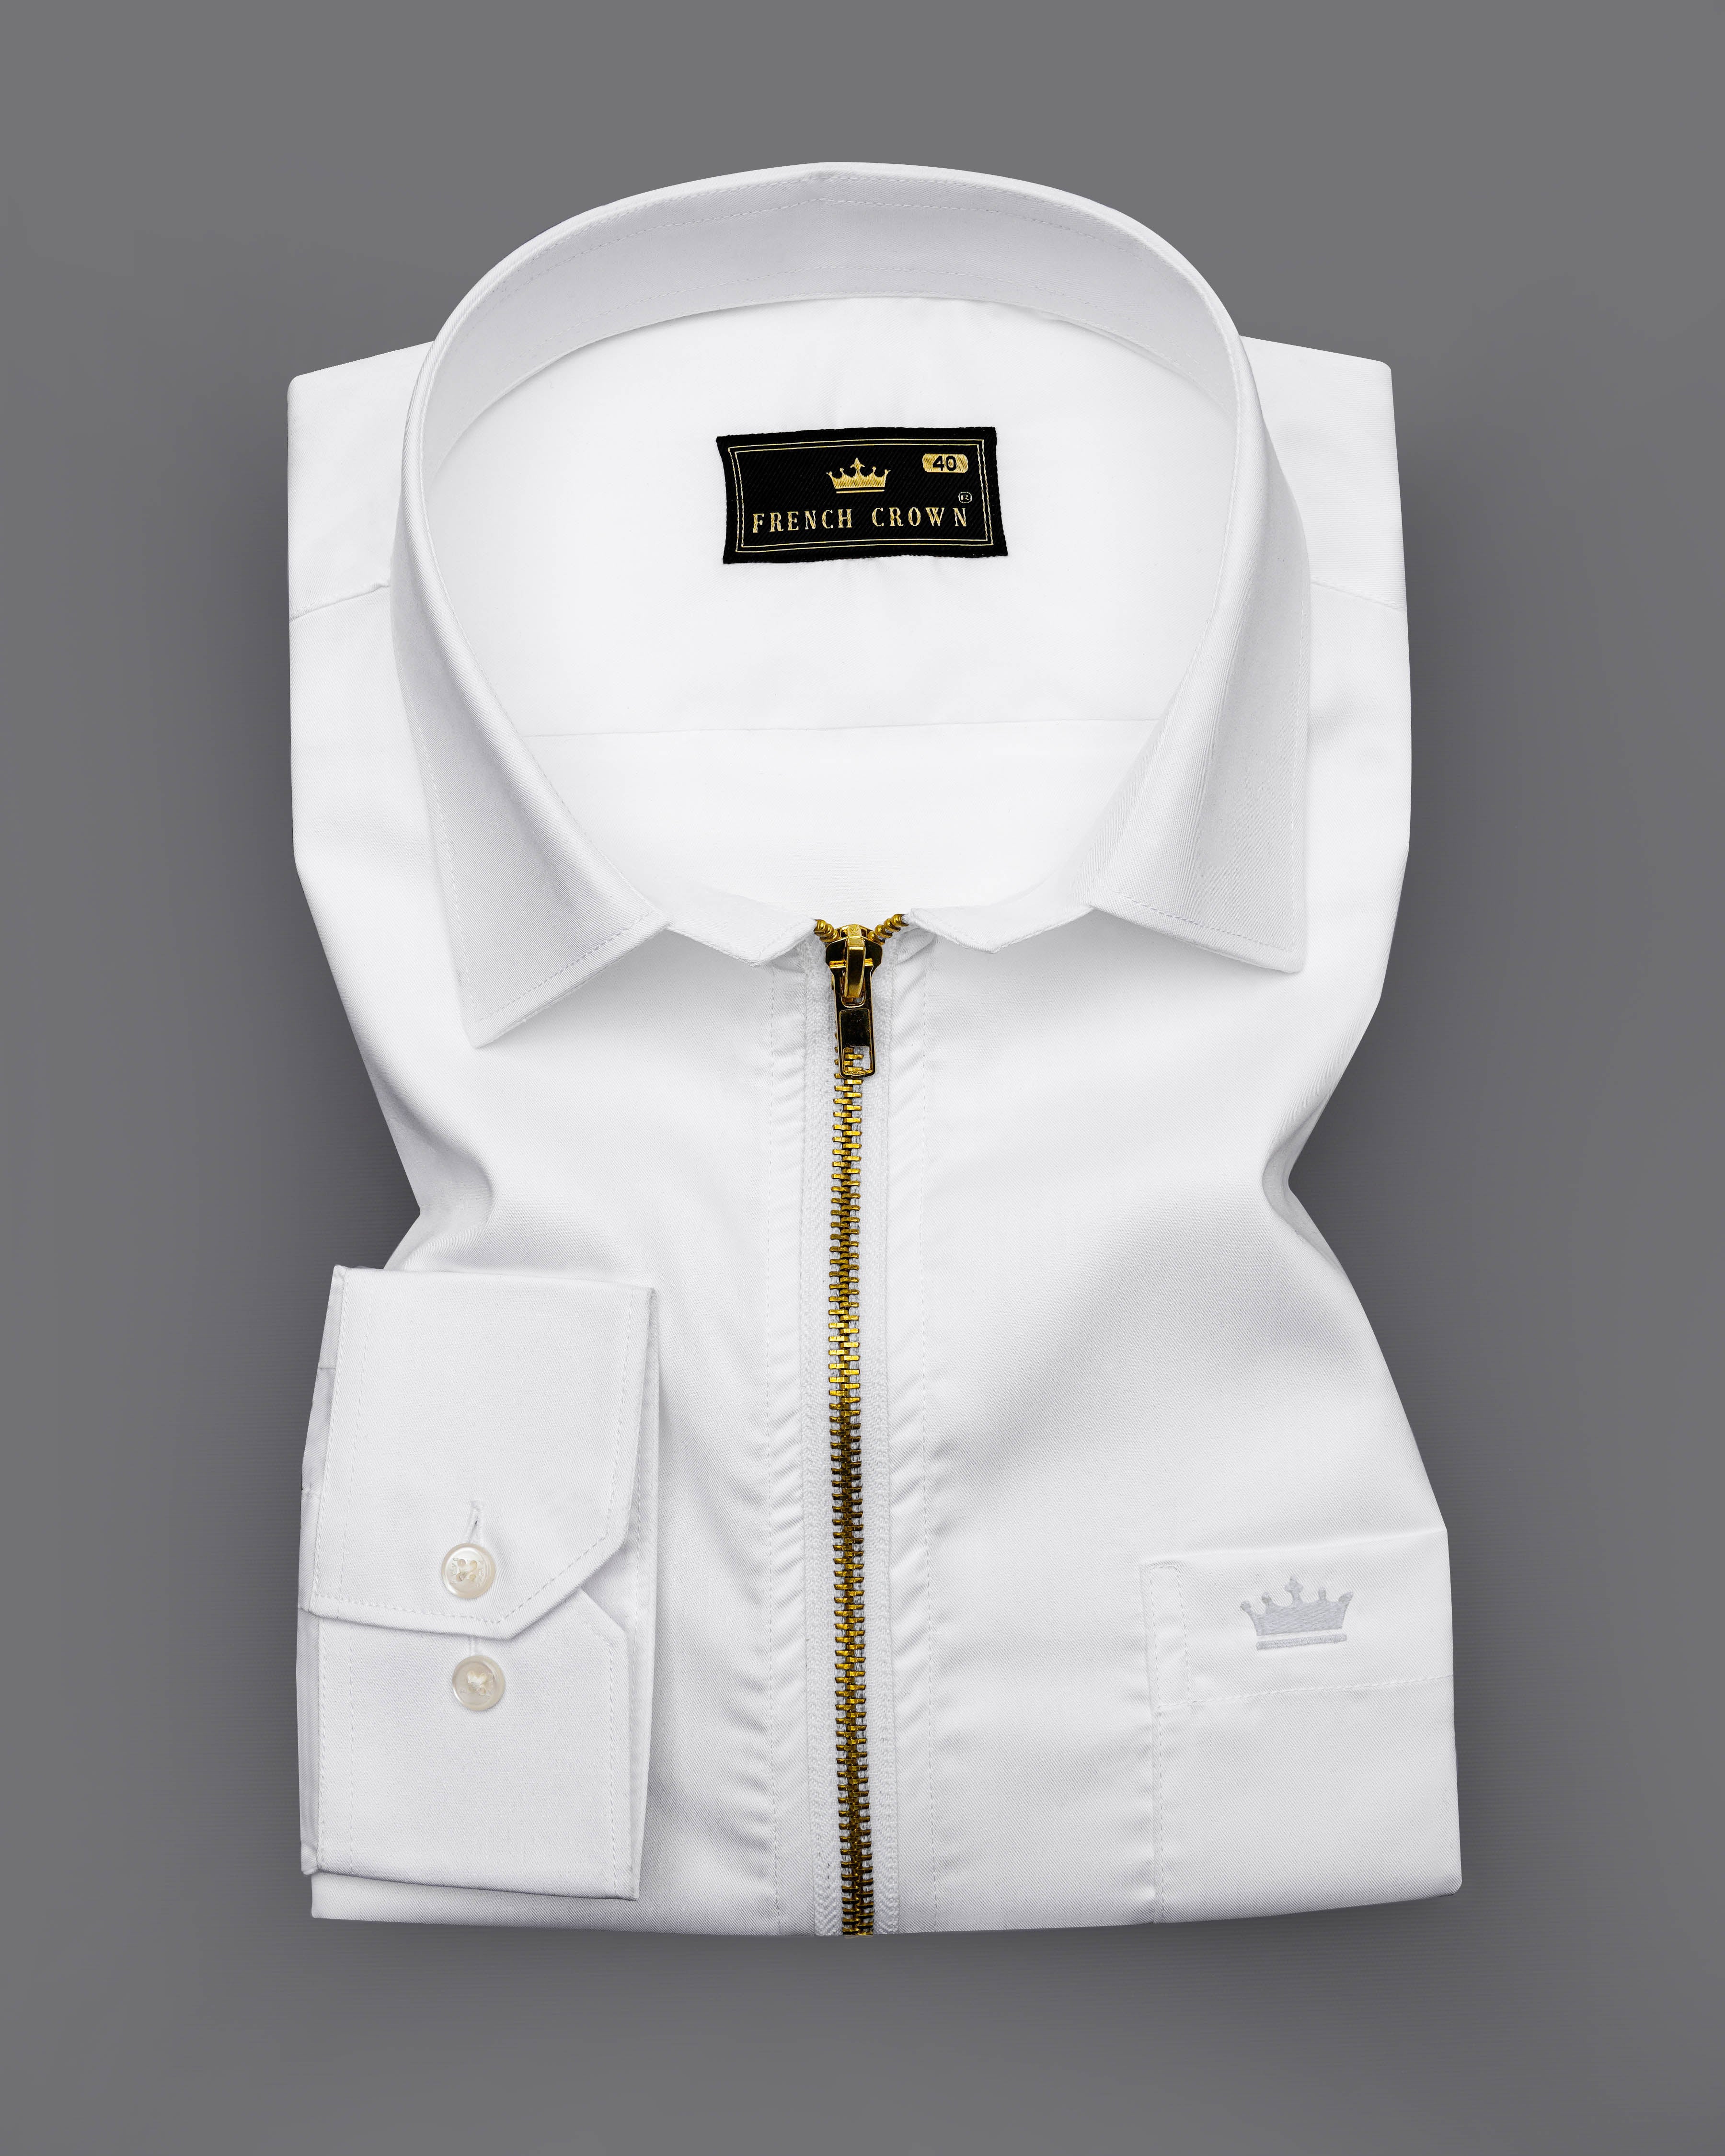 Premium Quality White Shirts For Men in India - French Crown